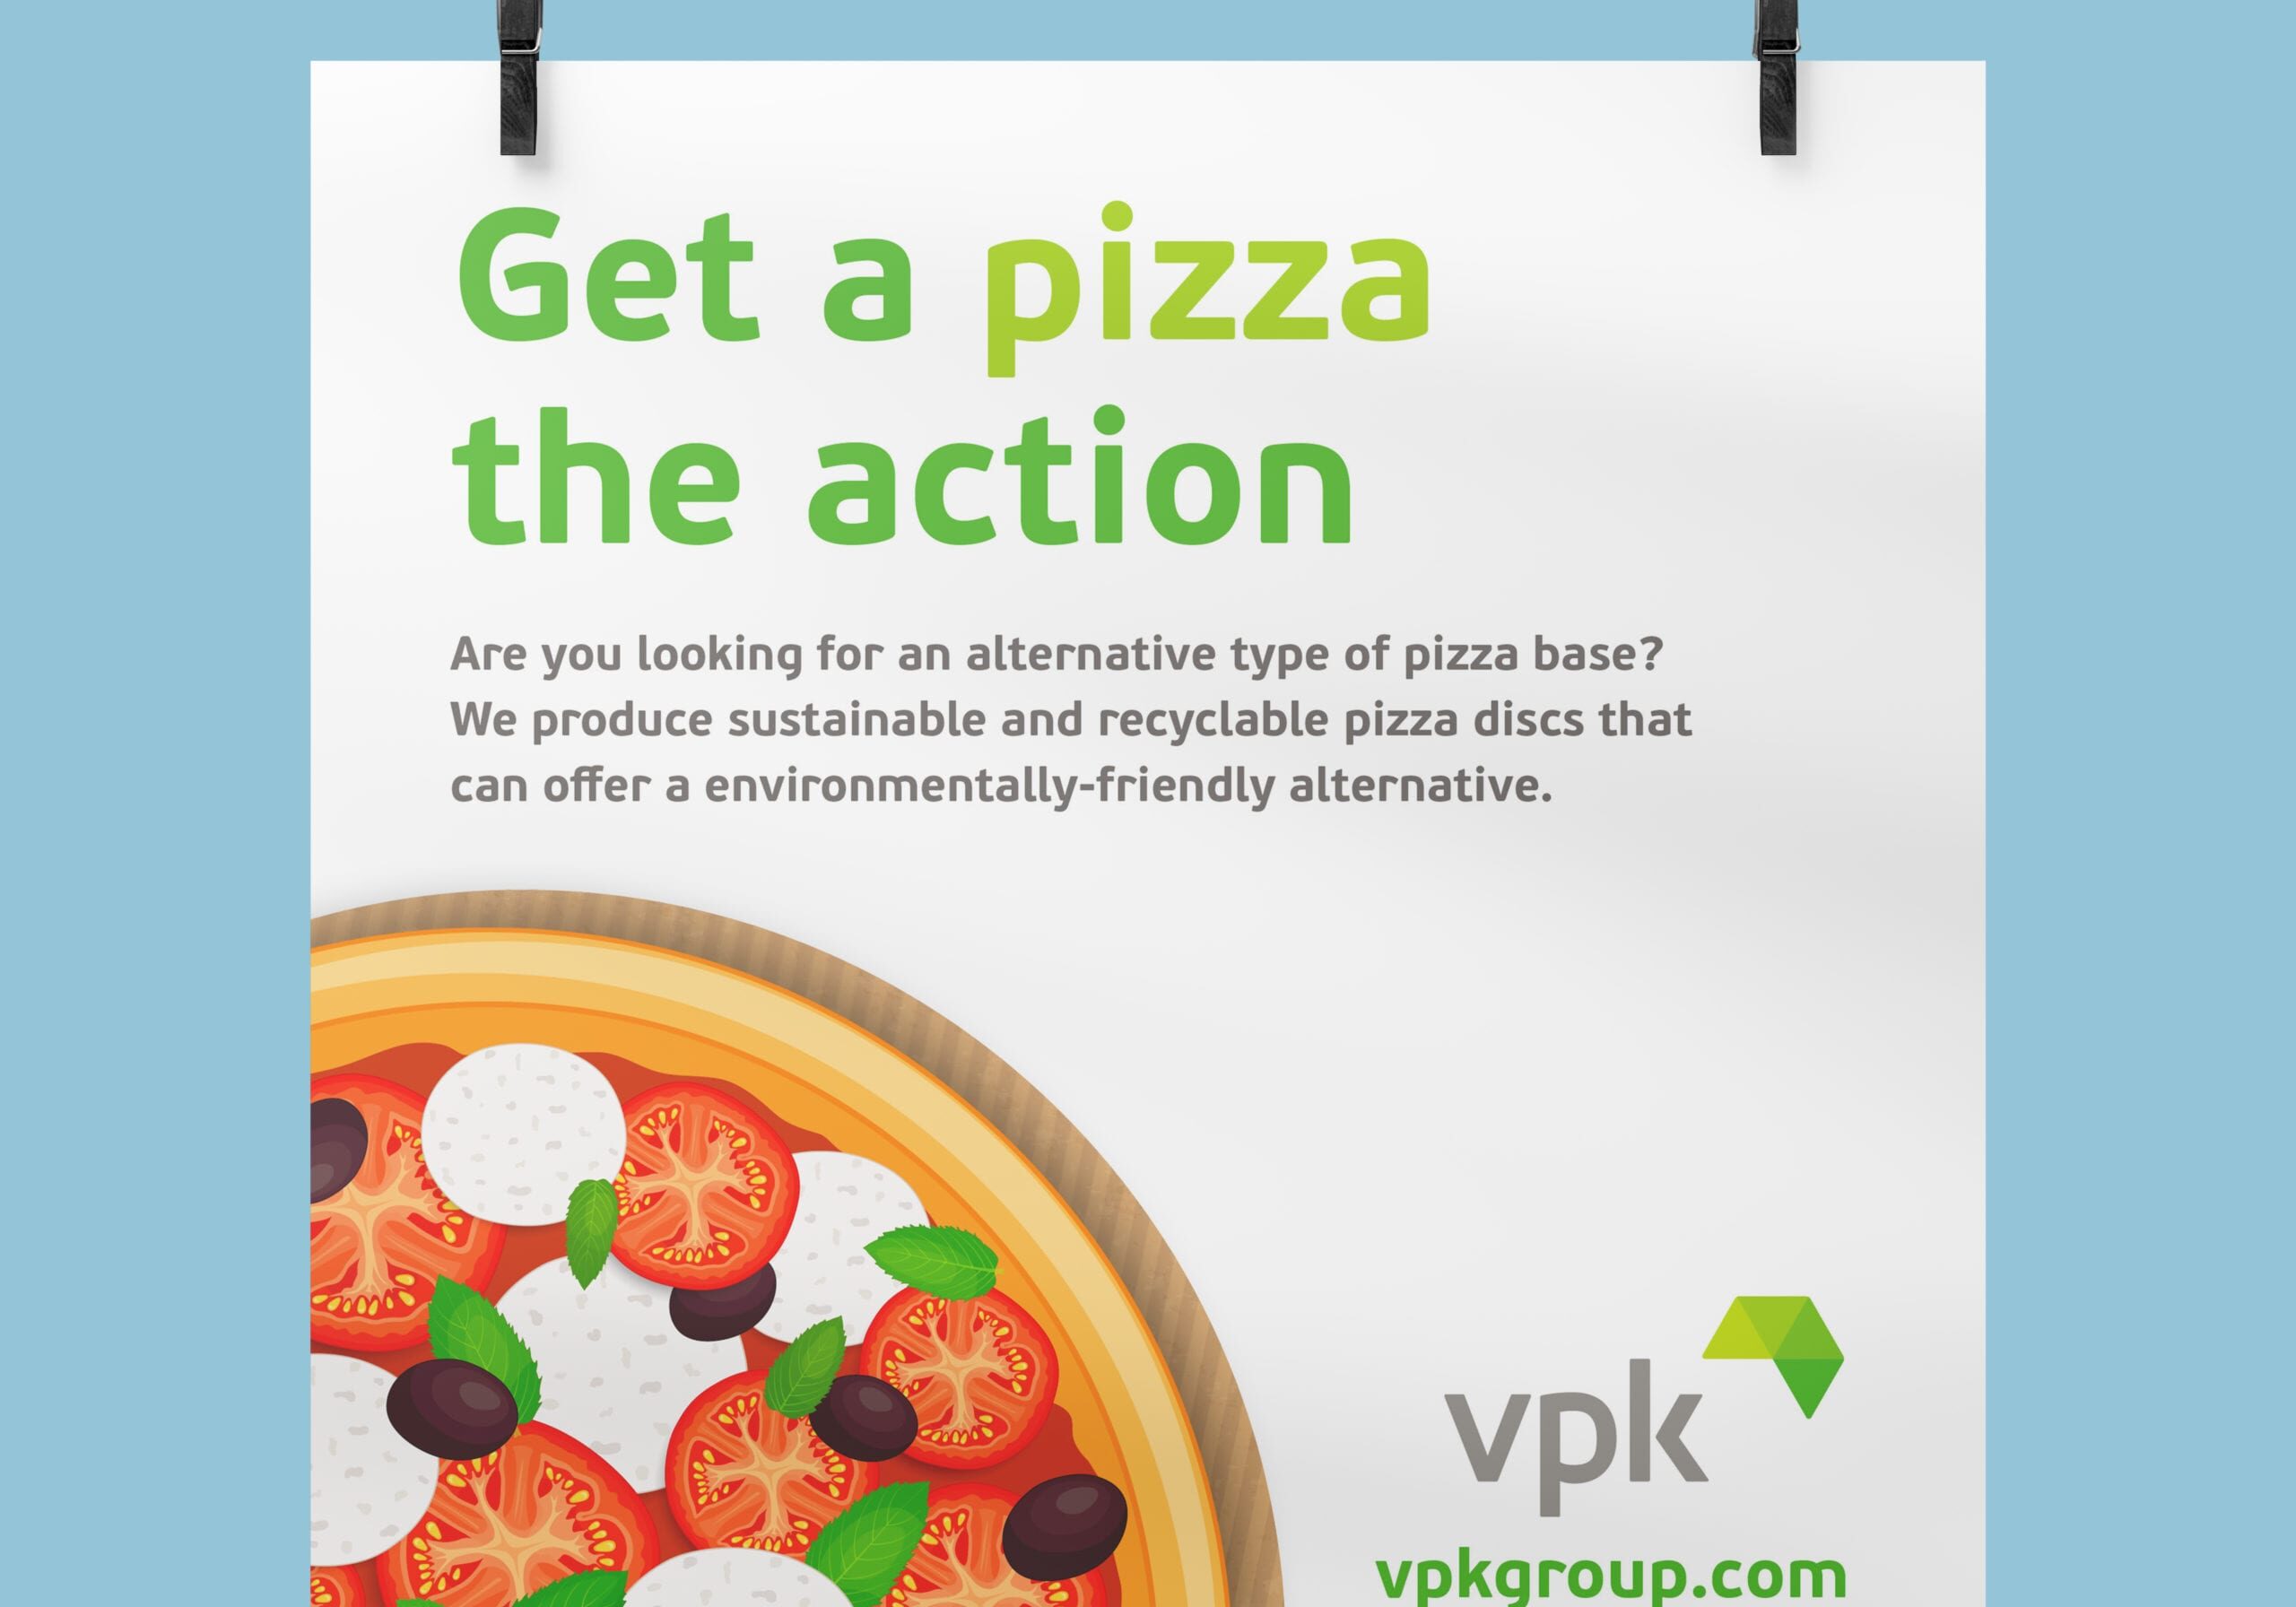 Social media post for VPK about their cardboard alternative pizza bases